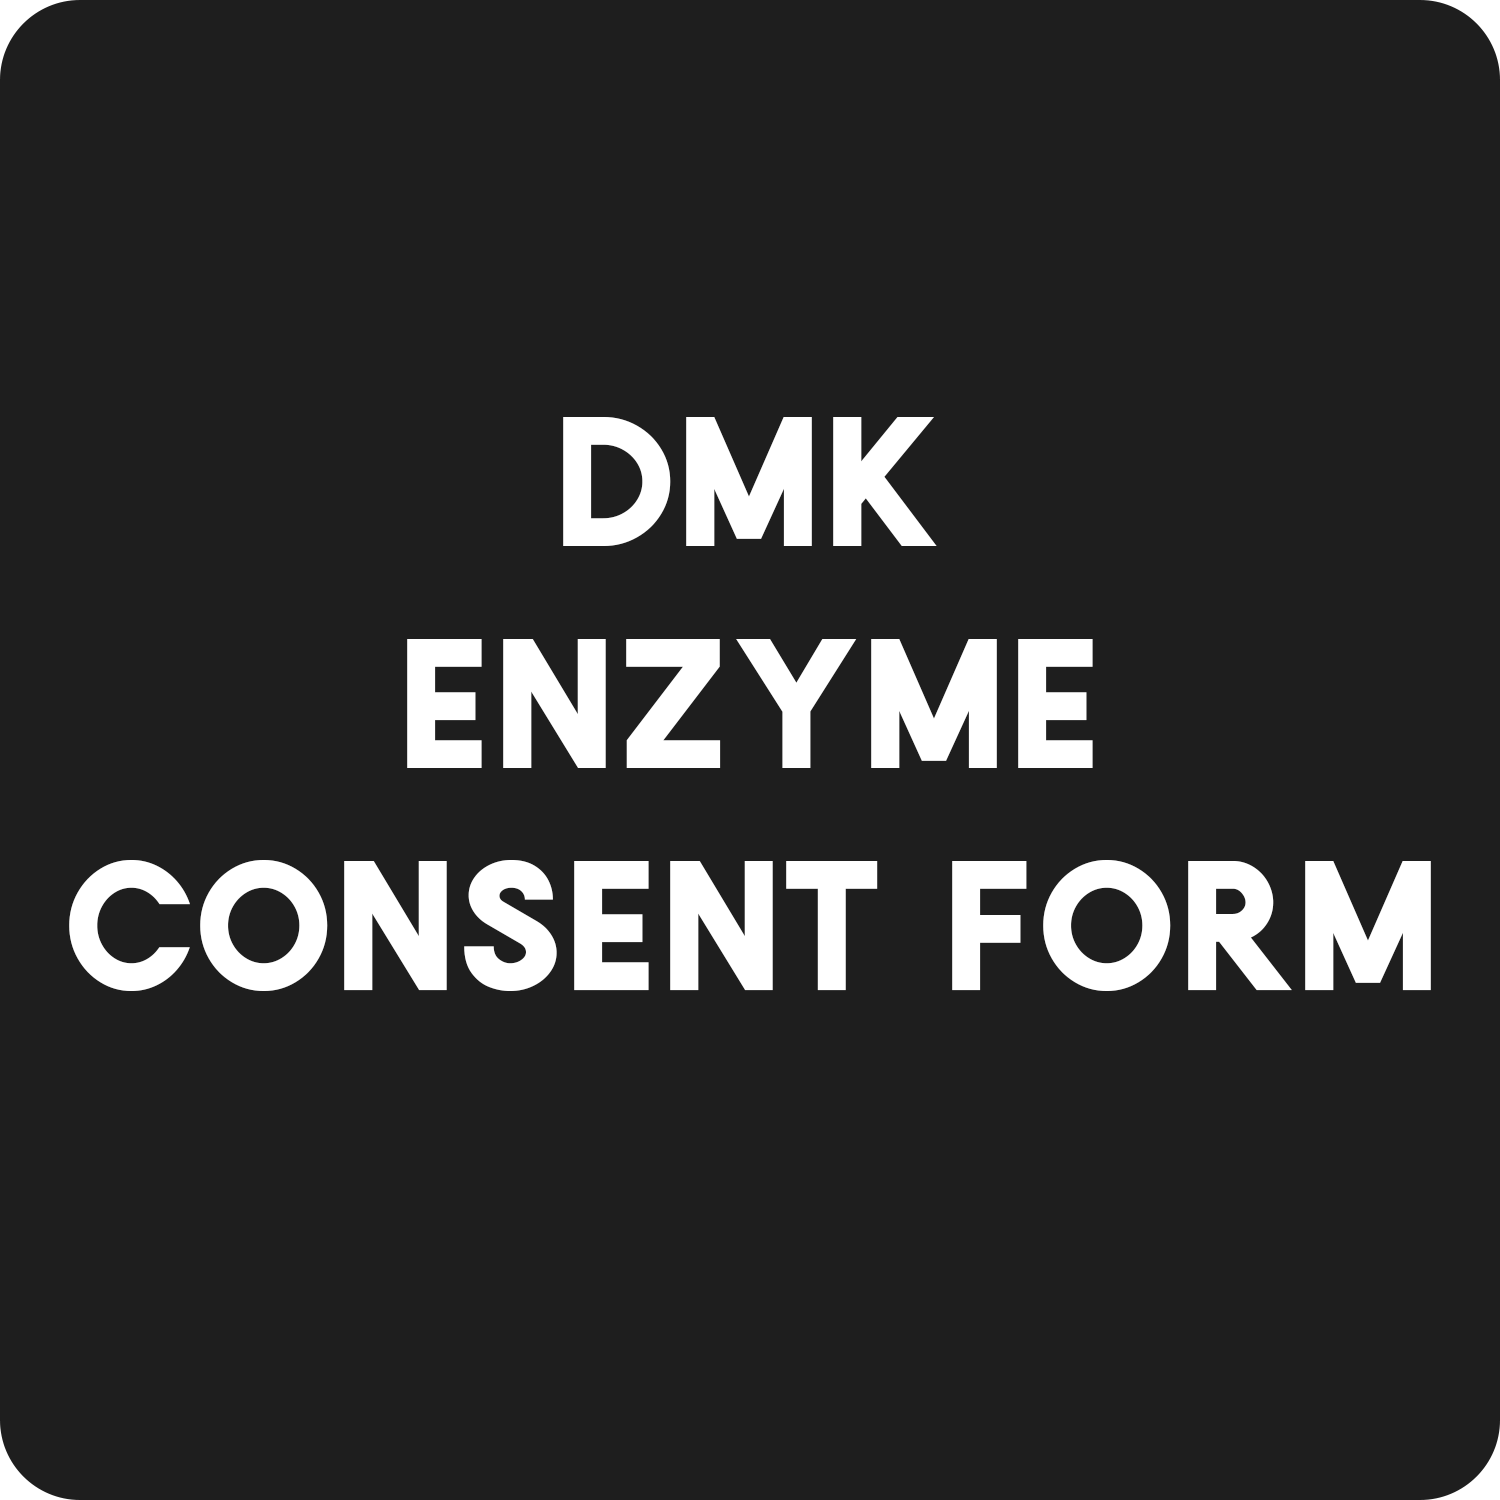 DMK Enzyme Consent Form